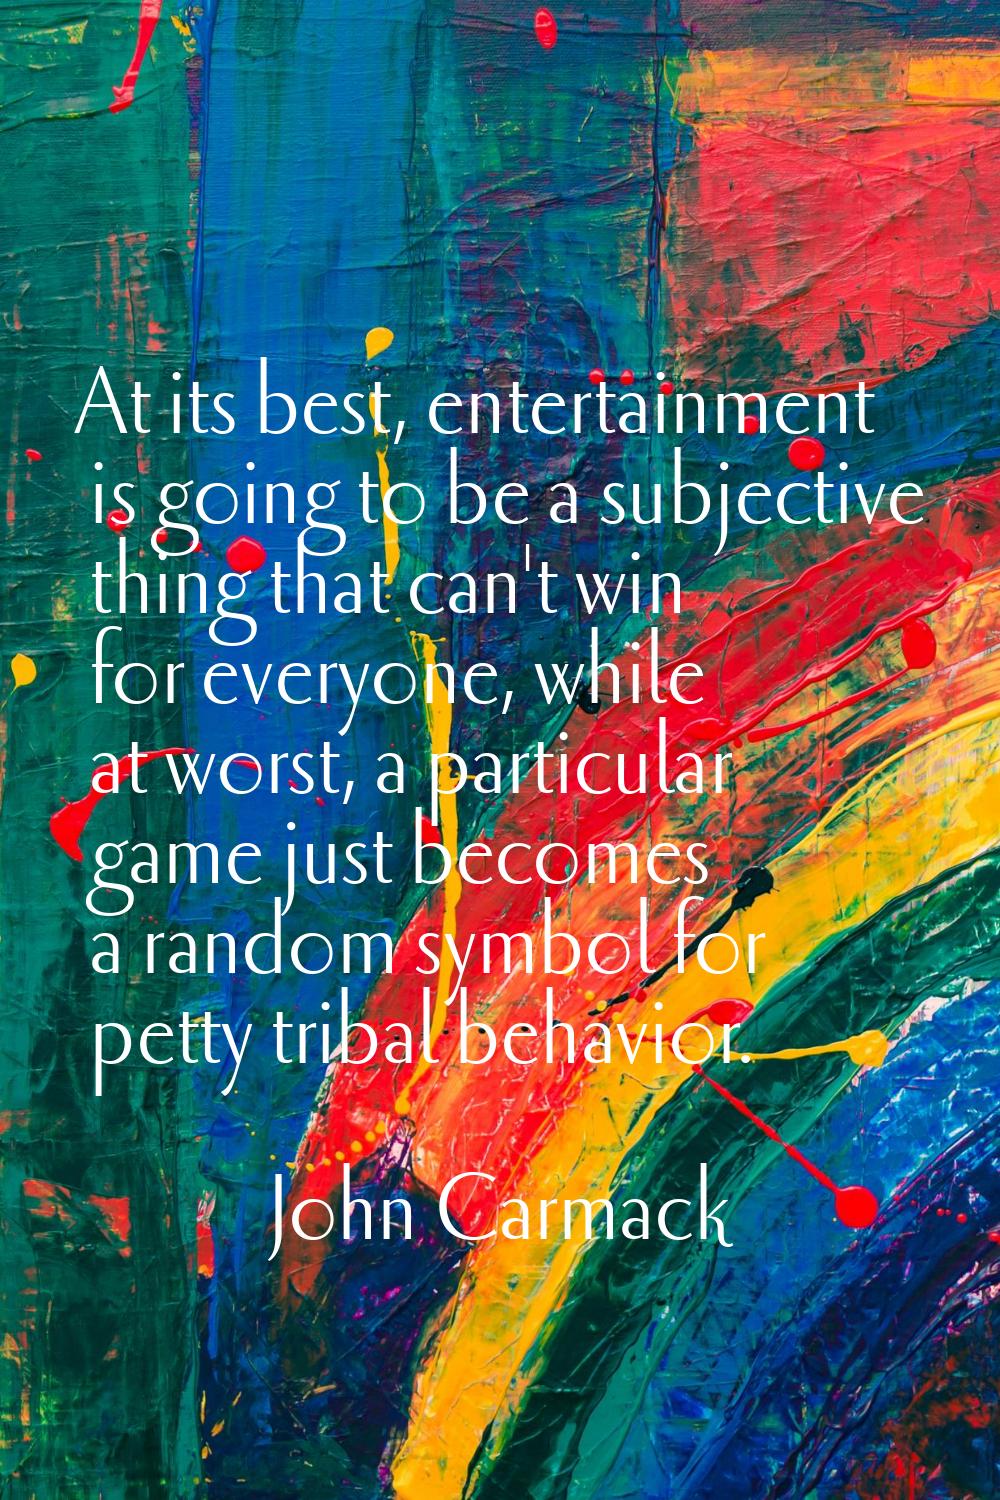 At its best, entertainment is going to be a subjective thing that can't win for everyone, while at 